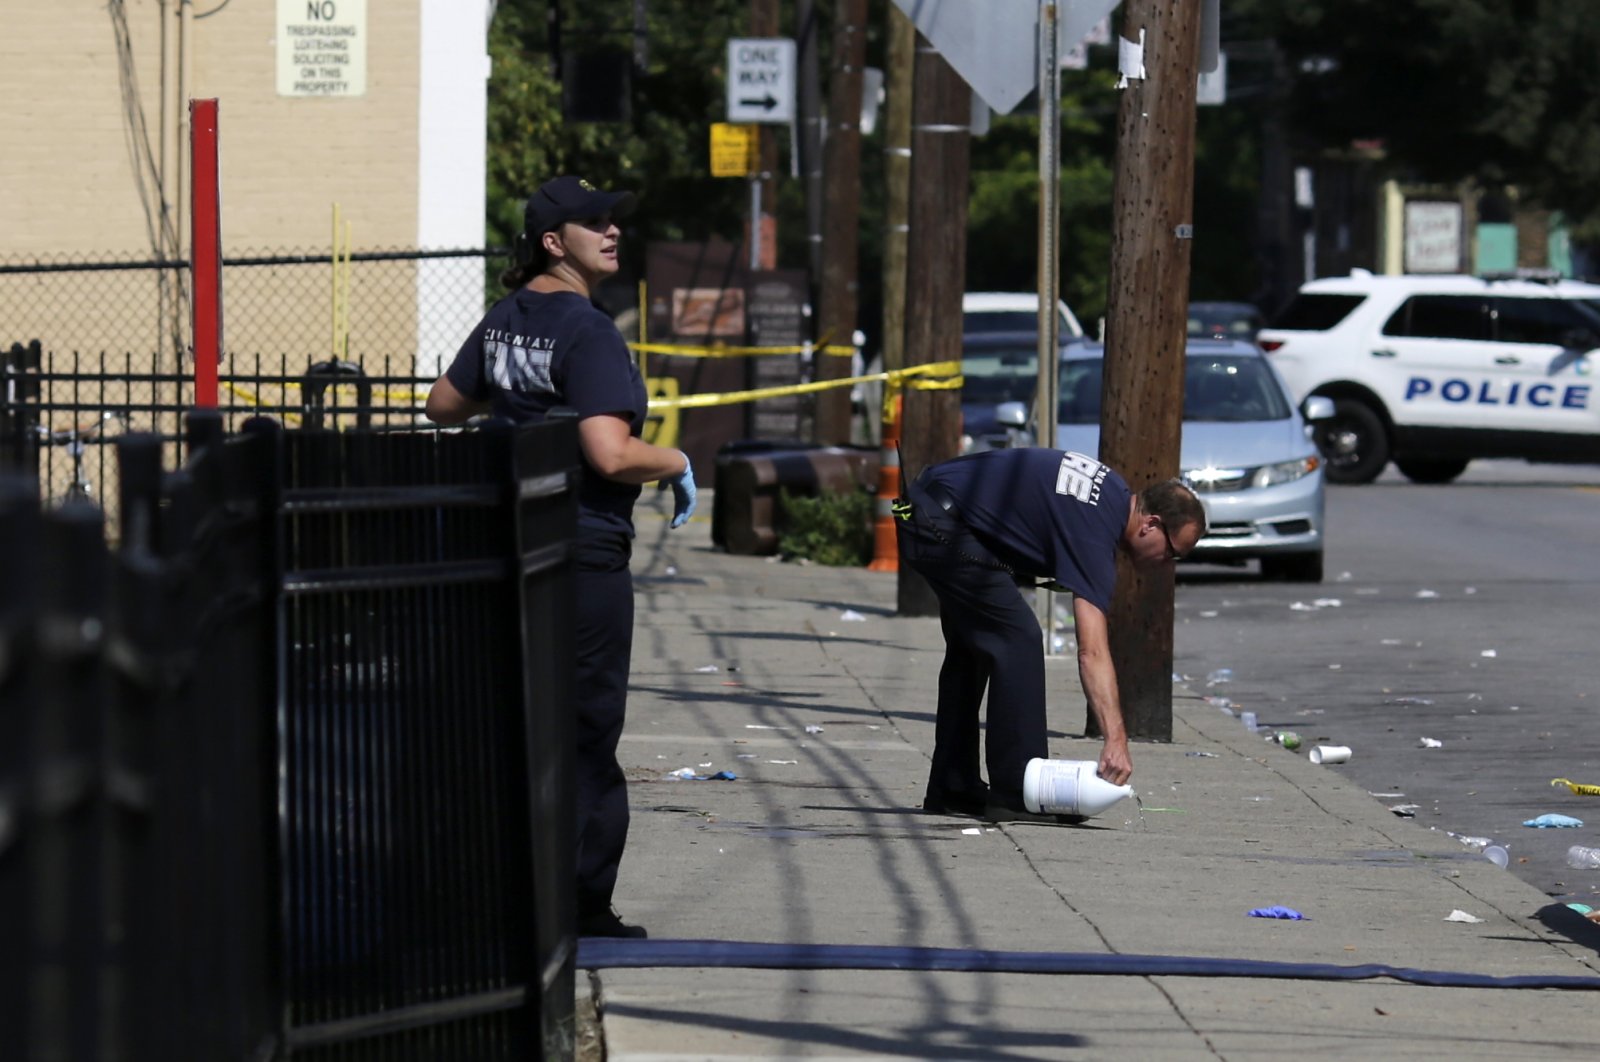 Cincinnati firefighters use bleach to clean and remove pools of blood left at the scene of a mass shooting near Grant Park in the Over-the-Rhine neighborhood of Cincinnati, Ohio, U.S., Aug. 16, 2020. (AP Photo)